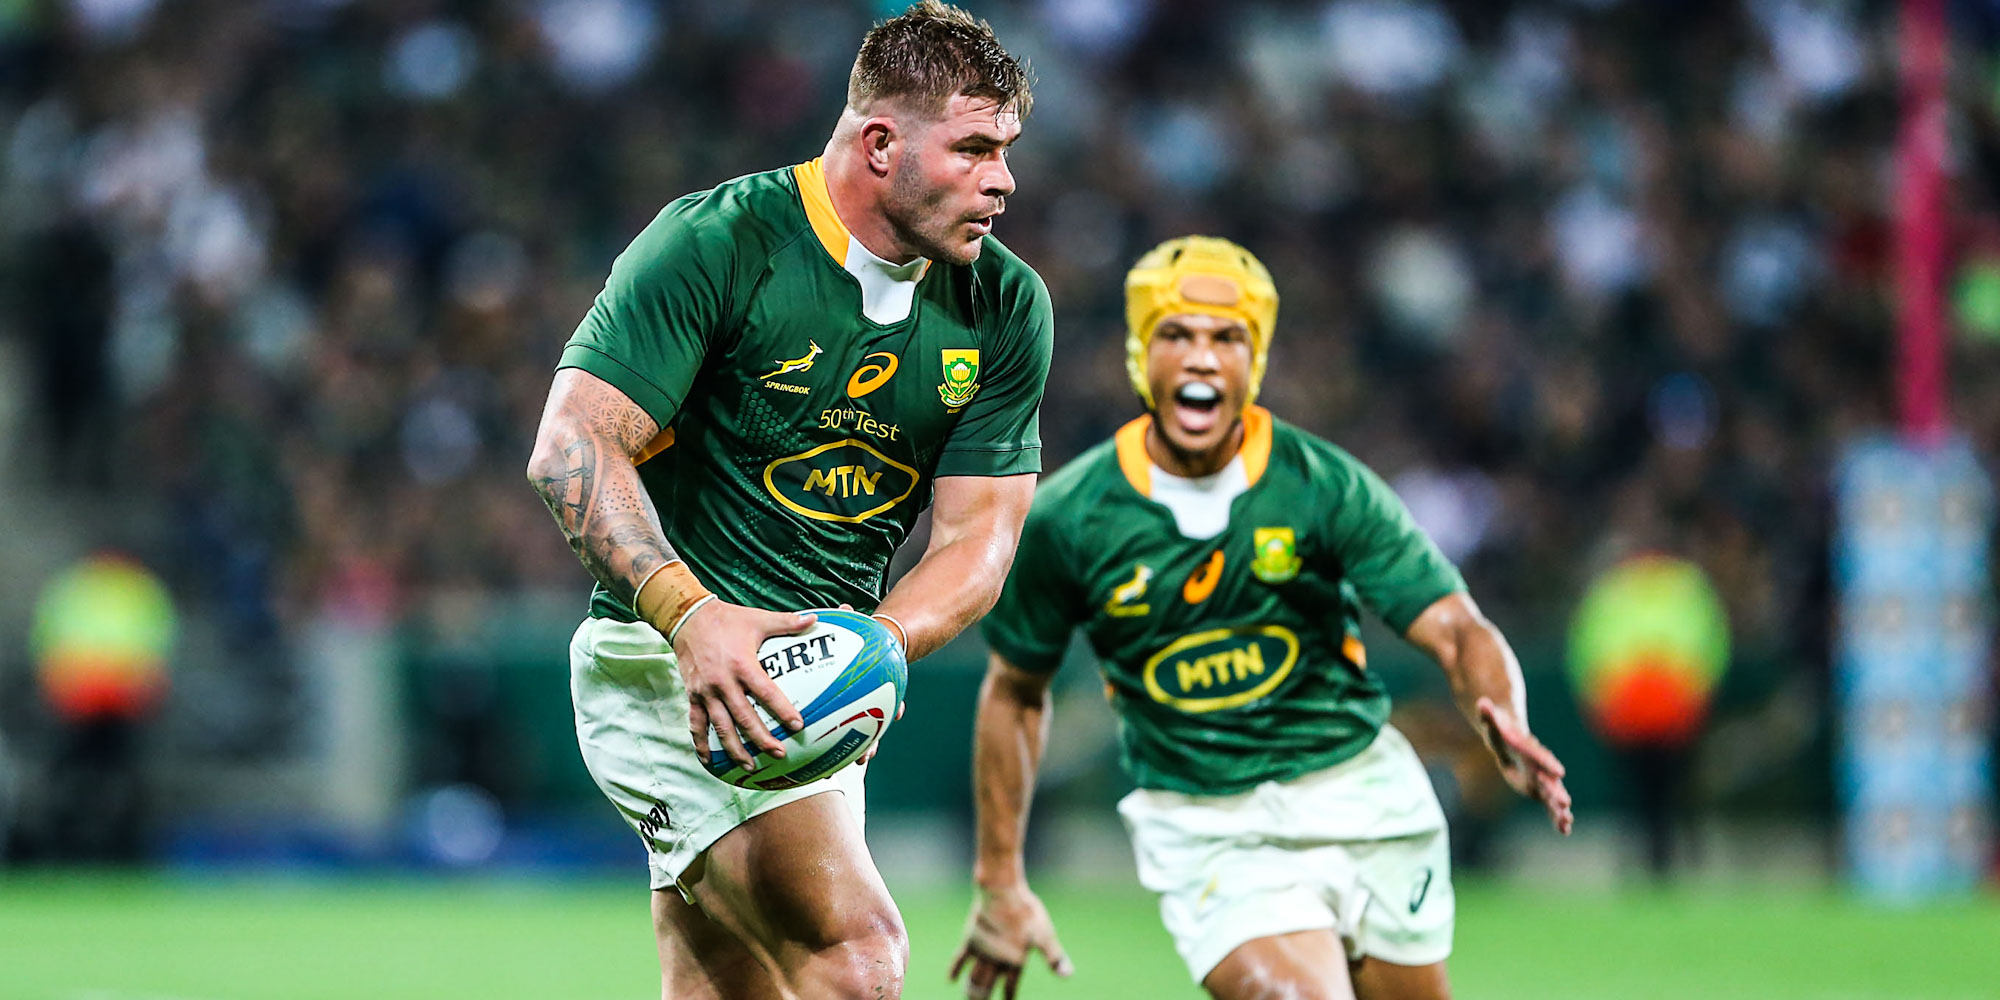 Malcolm Marx was superb in his 50th Springbok Test.